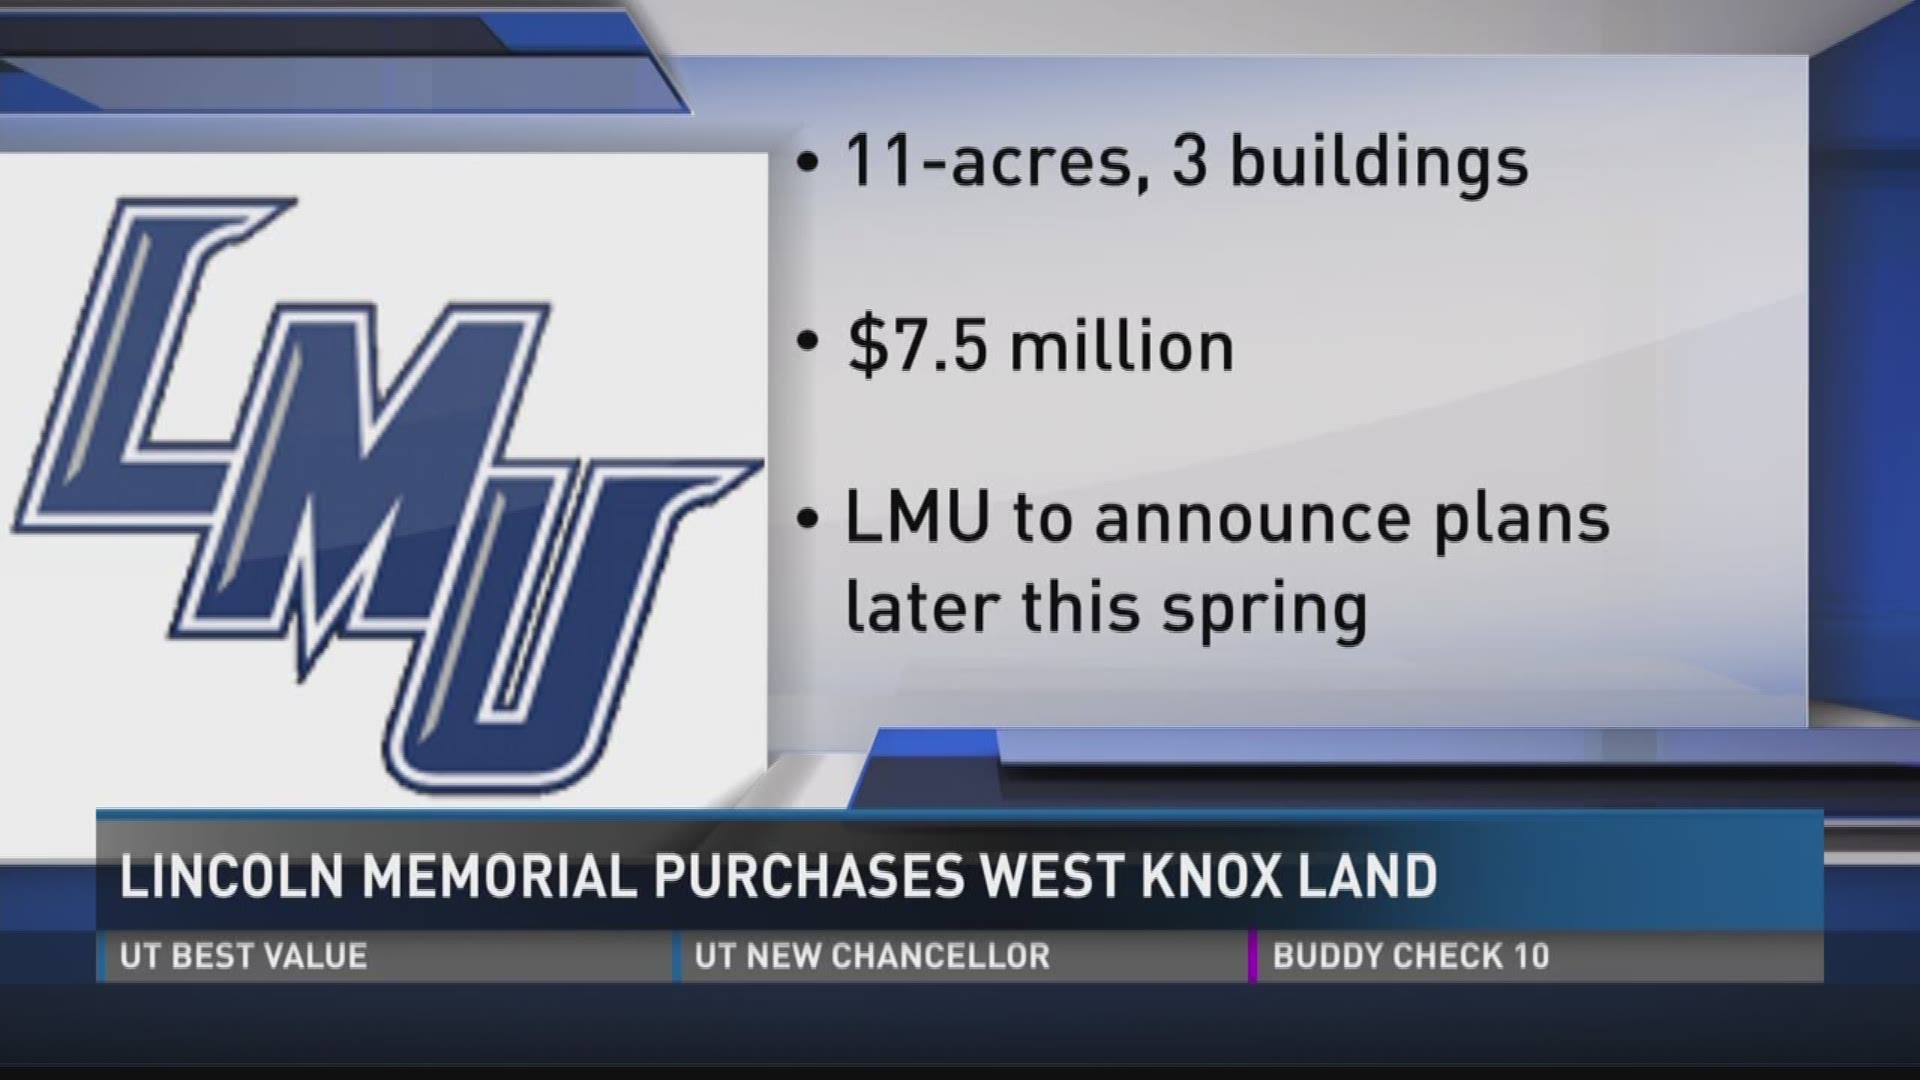 April 10, 2017: Lincoln Memorial University has purchased an 11-acre site in West Knox County.